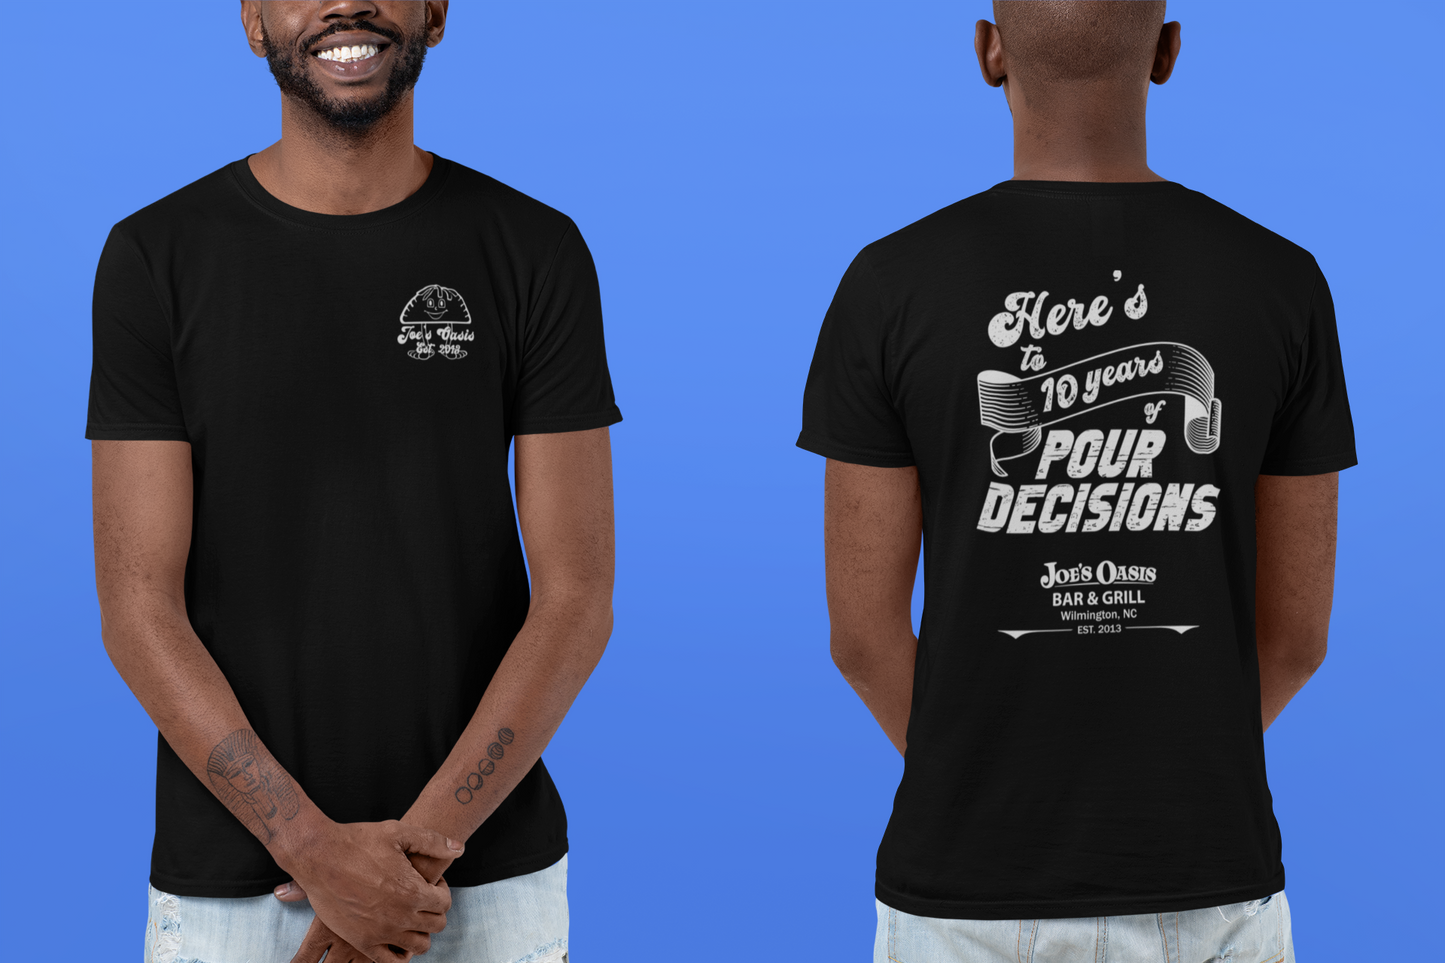 Joe's Oasis - Here's to 10 Years of Pour Decisions T-shirt